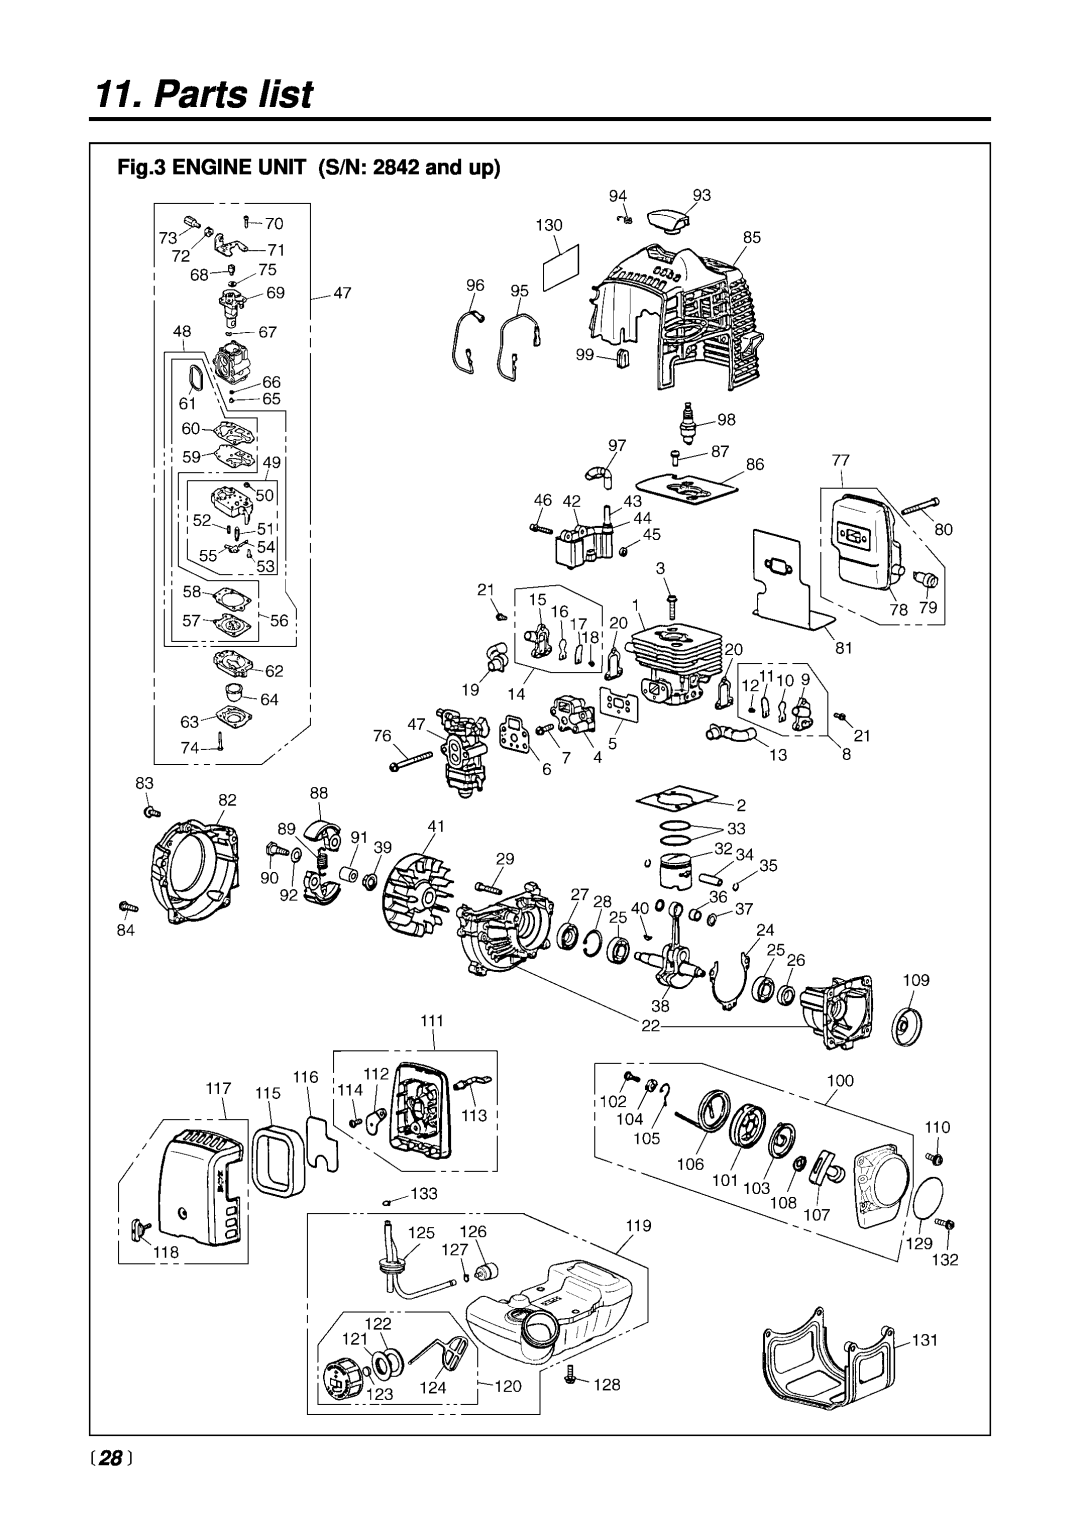 RedMax SGCZ2500S manual ENGINE UNIT S/N 2842 and up,  28 , Parts list 